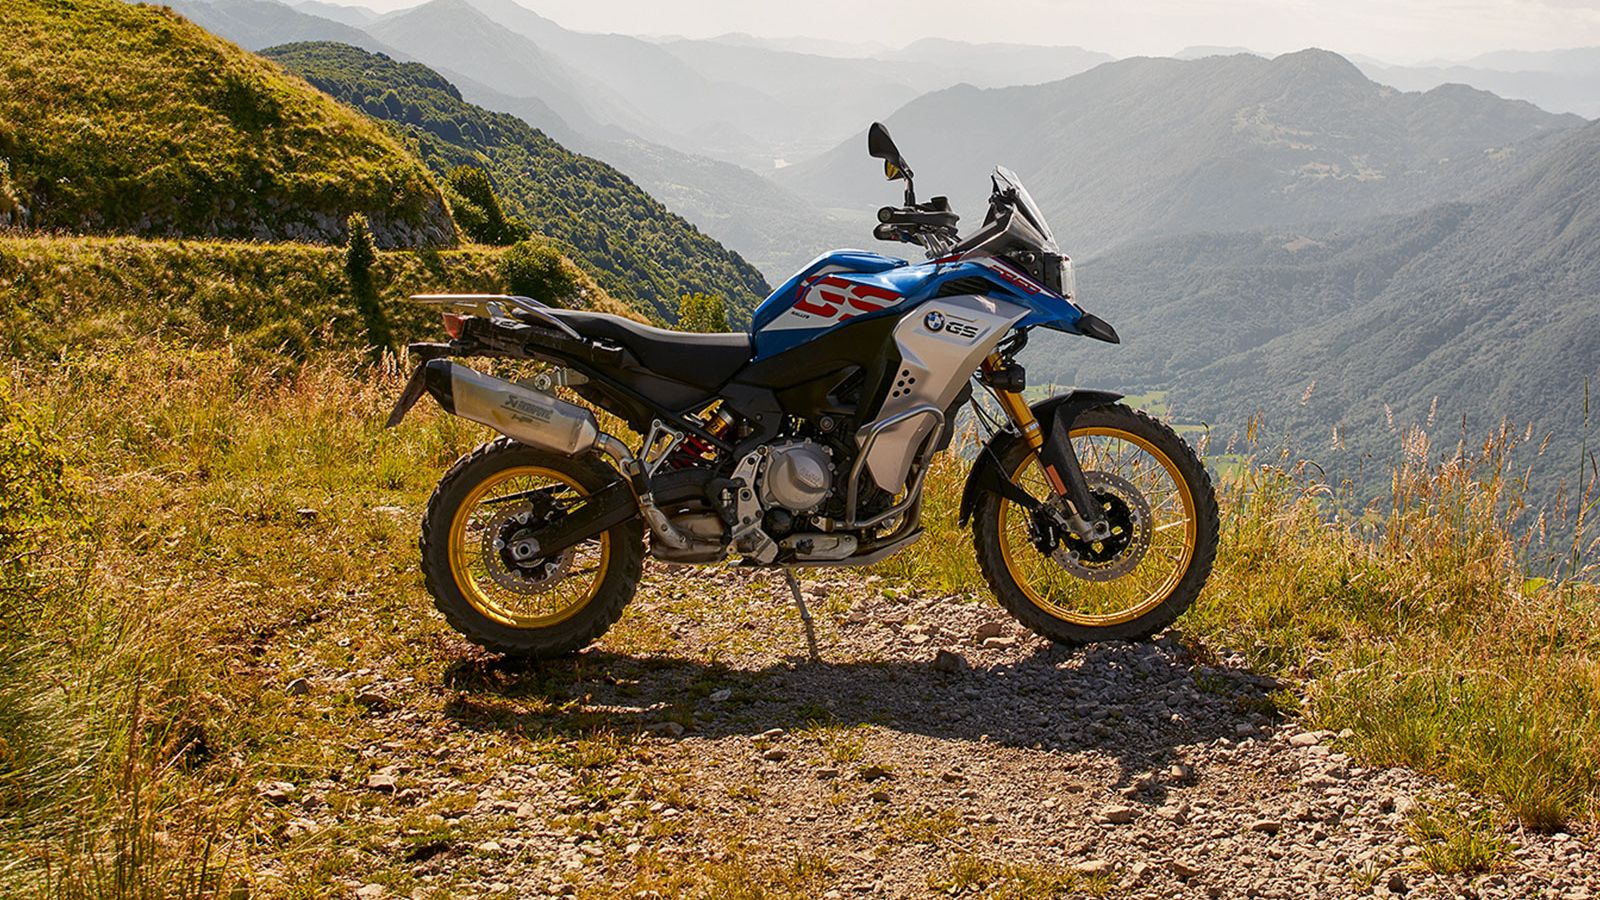 BMW F 850 GS Adventure in mountains